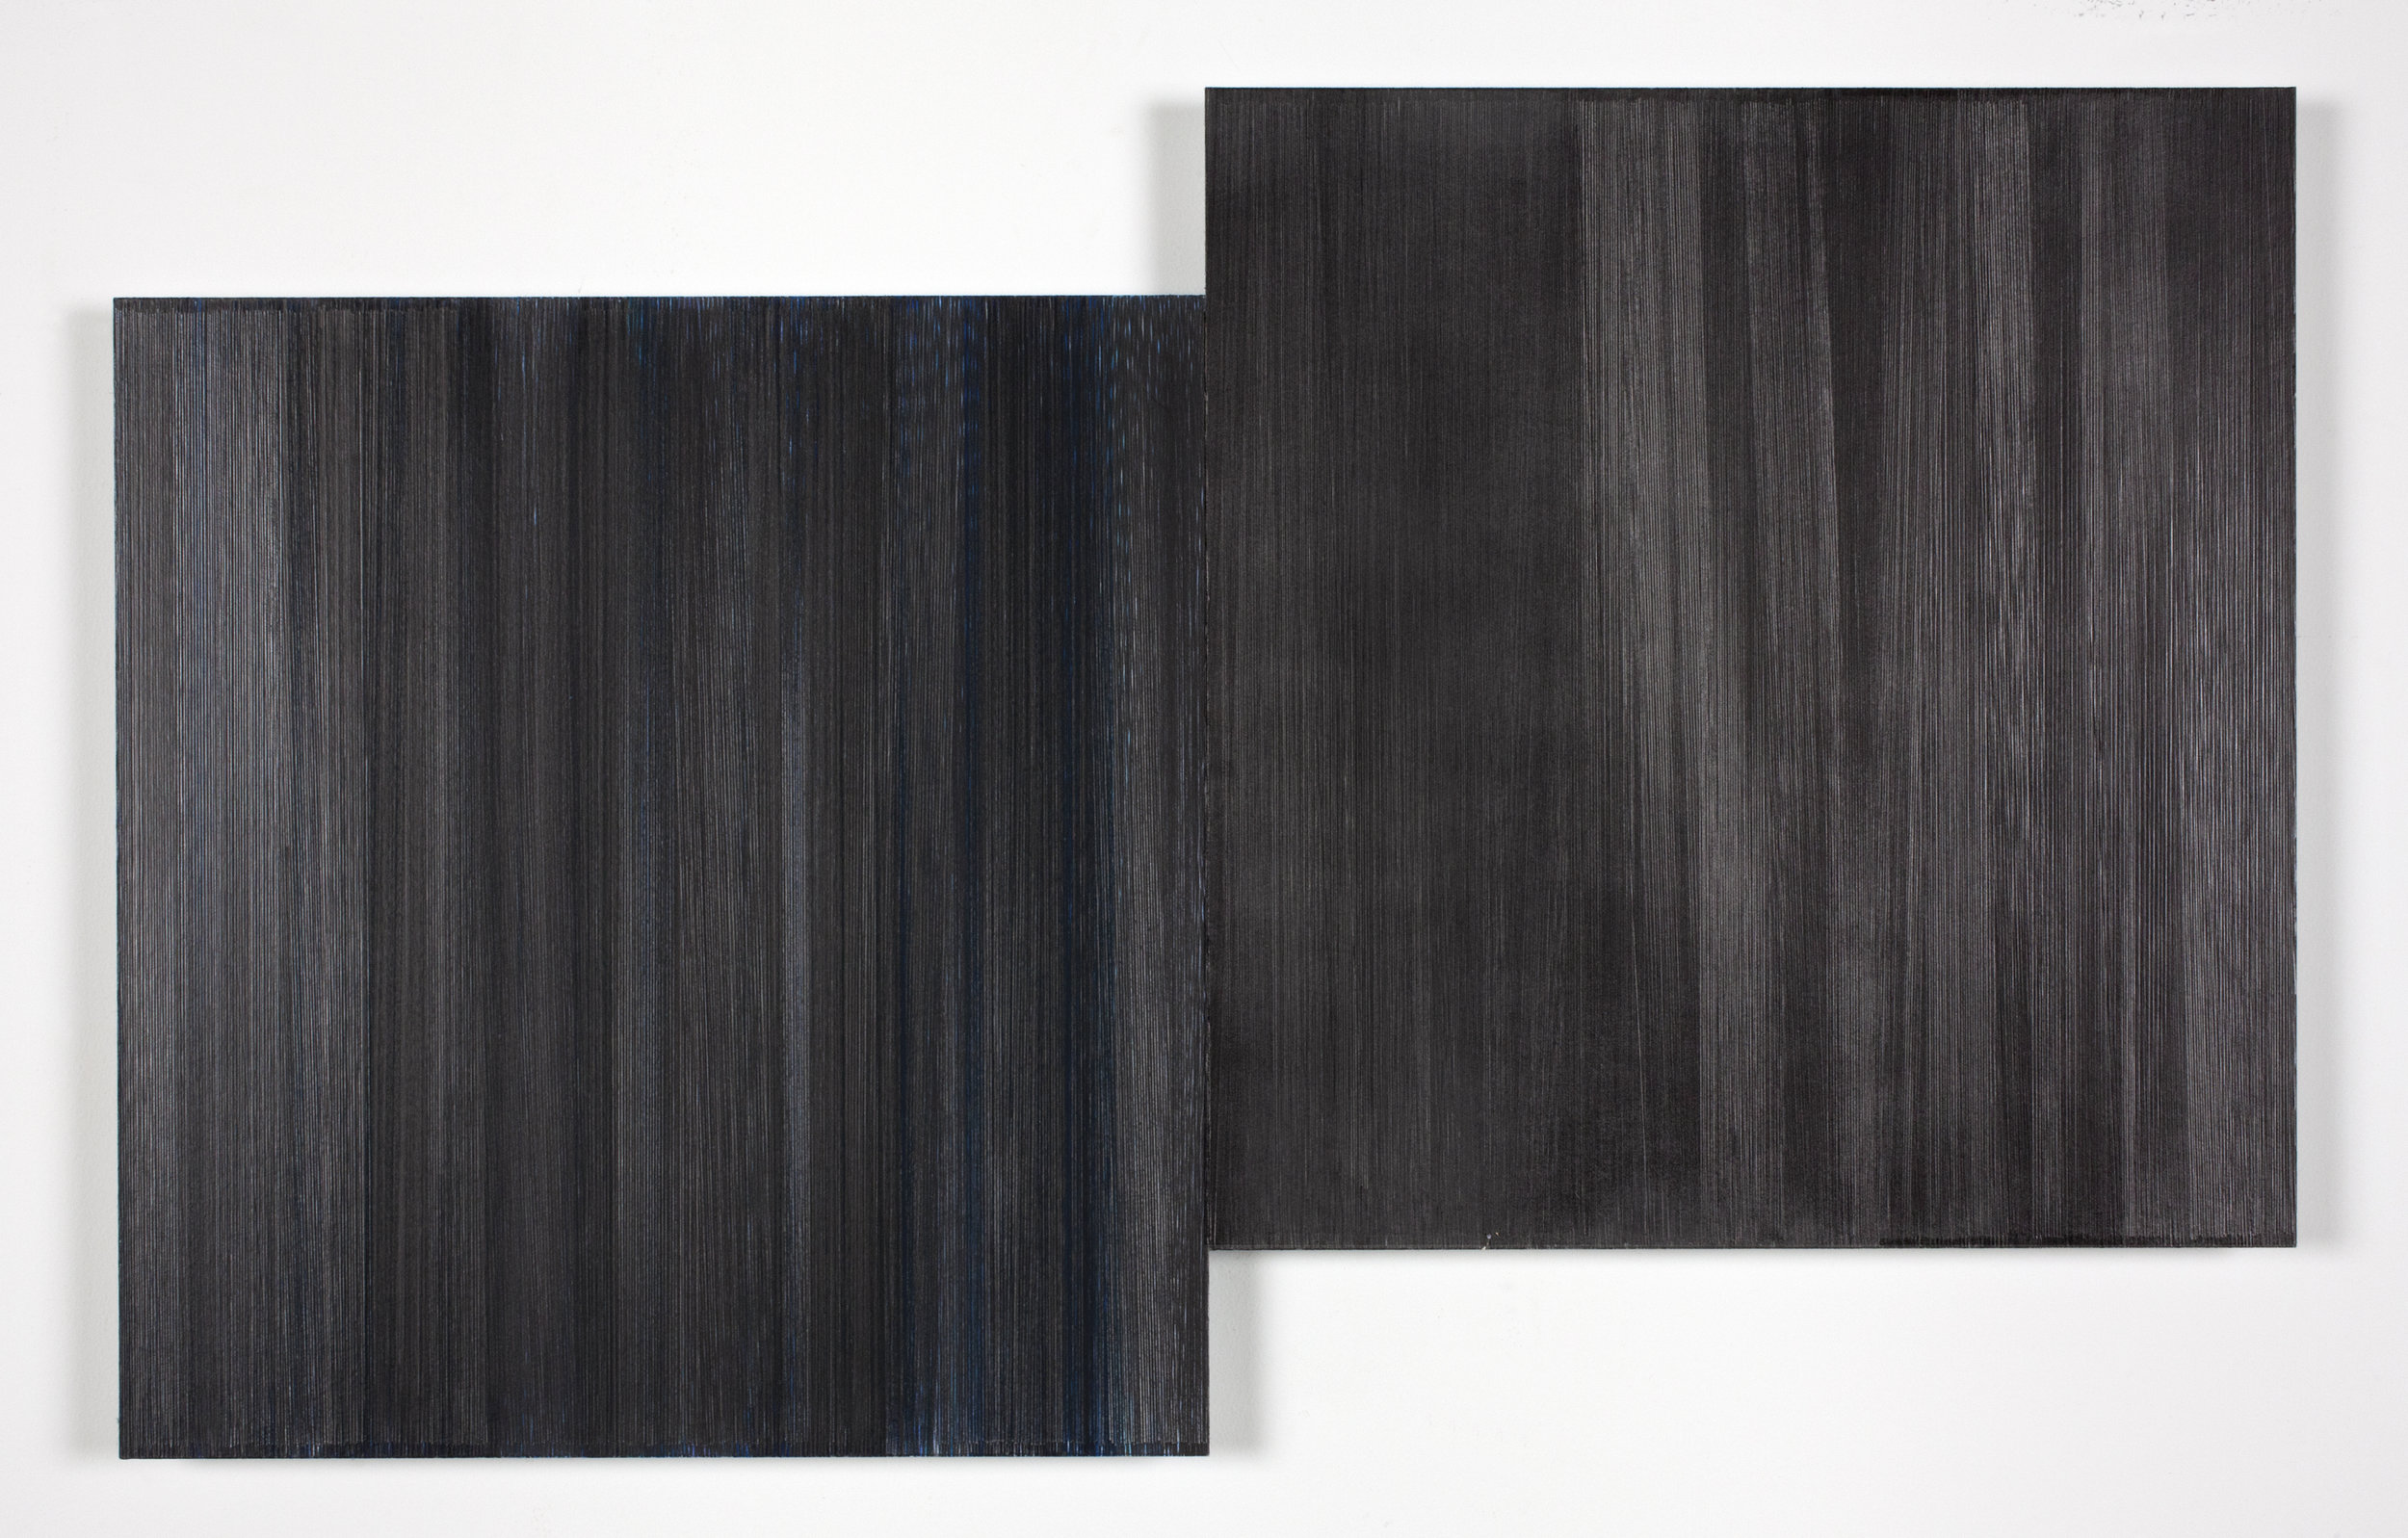    two black trees   2016 graphite and colored pencil on mat board 24 x 36 inches (two panels) 